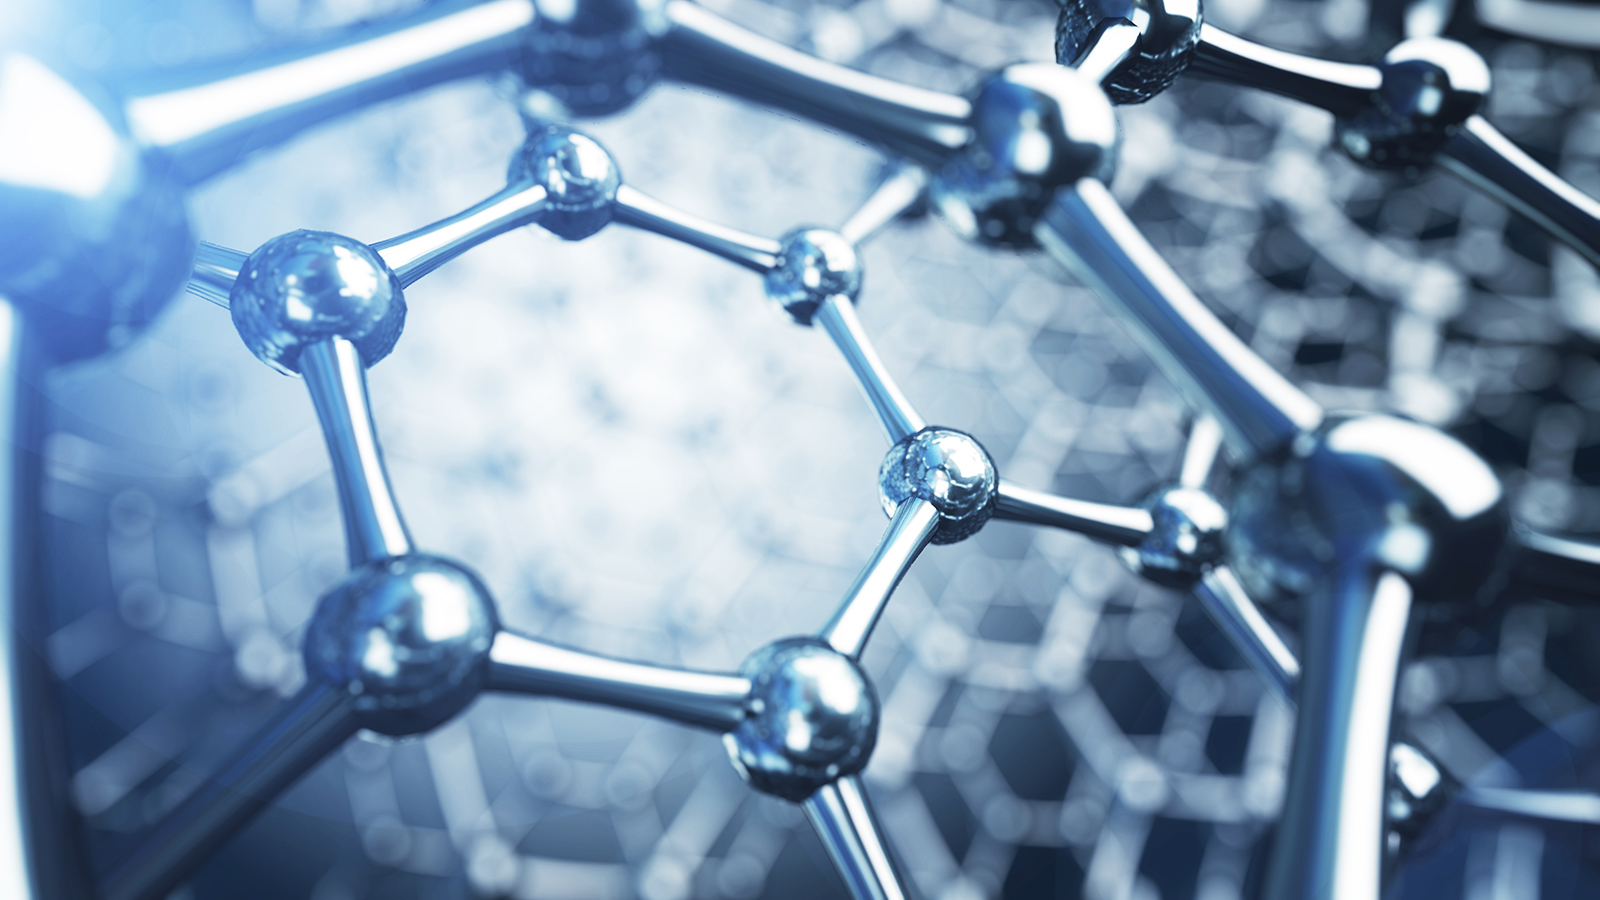 Argonne scientists have developed a way to extend the lifetime of photocathodes by wrapping them up in a protective coat of atomically thin graphene (shown here). (Image by Shutterstock / Egorov Artem.)